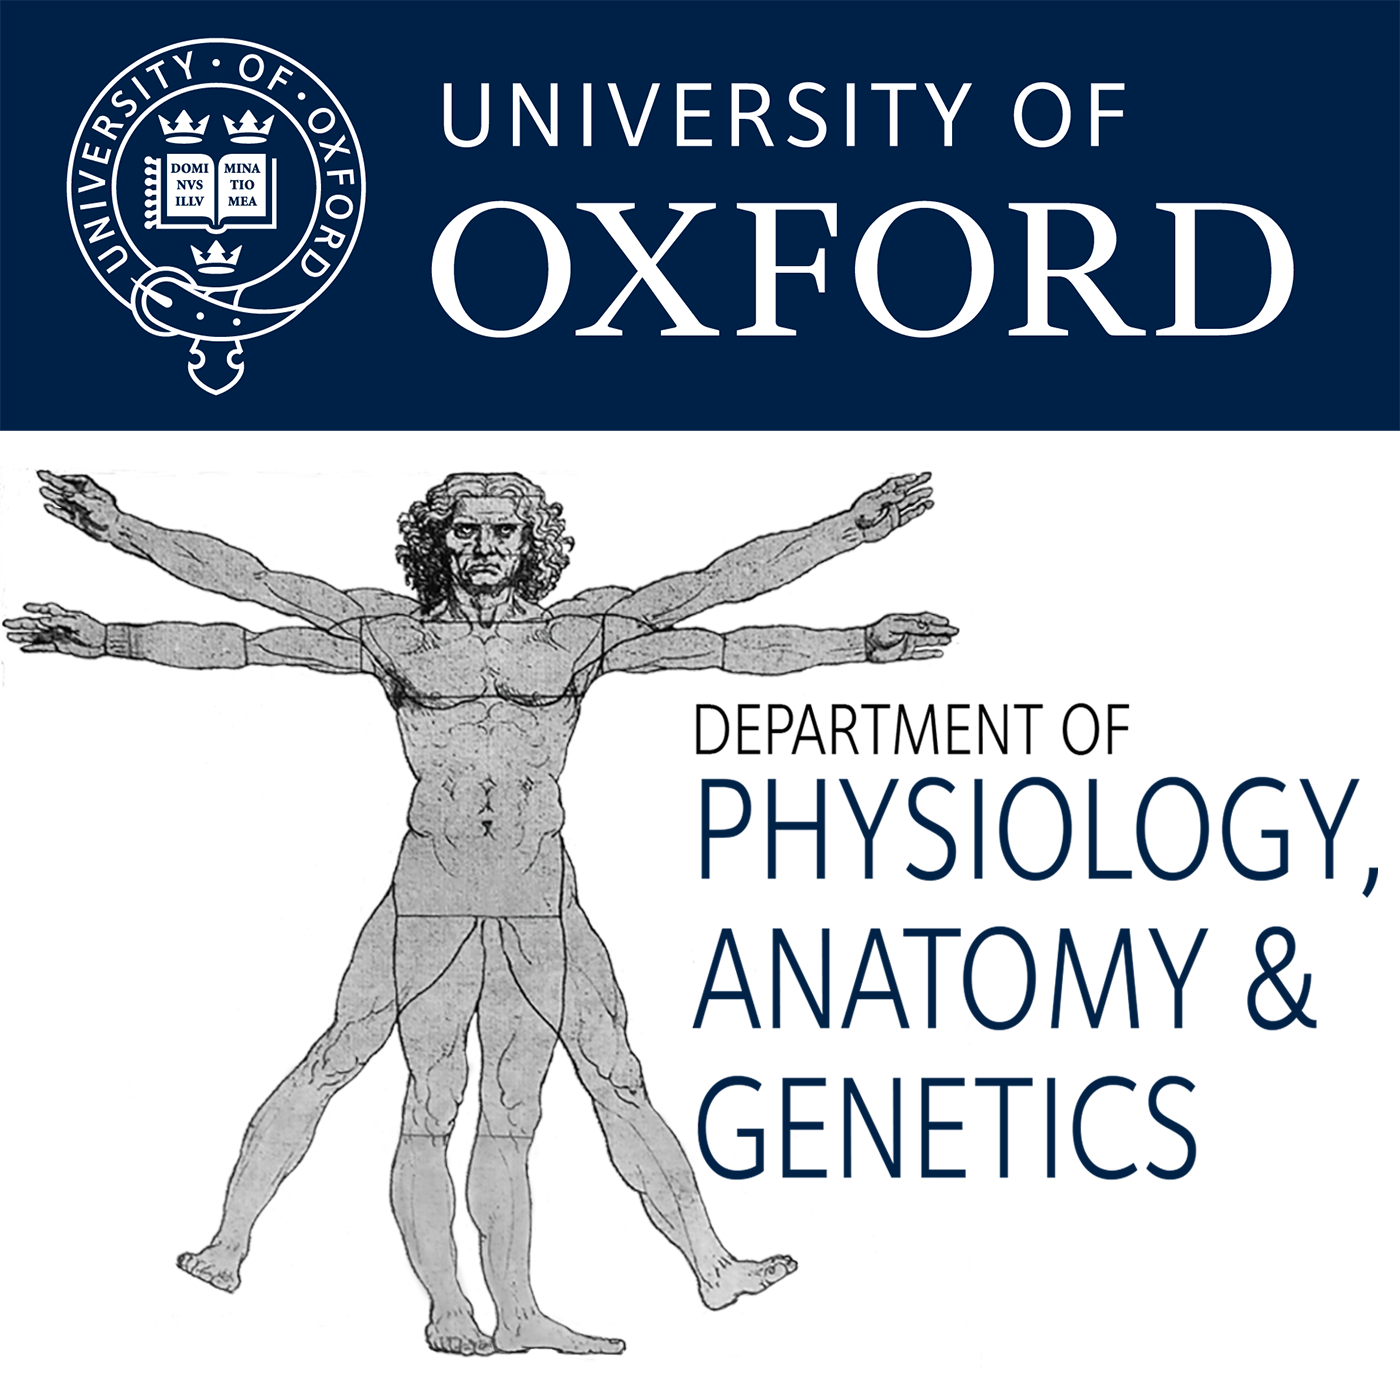 Public Lecture Podcasts from the Department of Physiology, Anatomy and Genetics